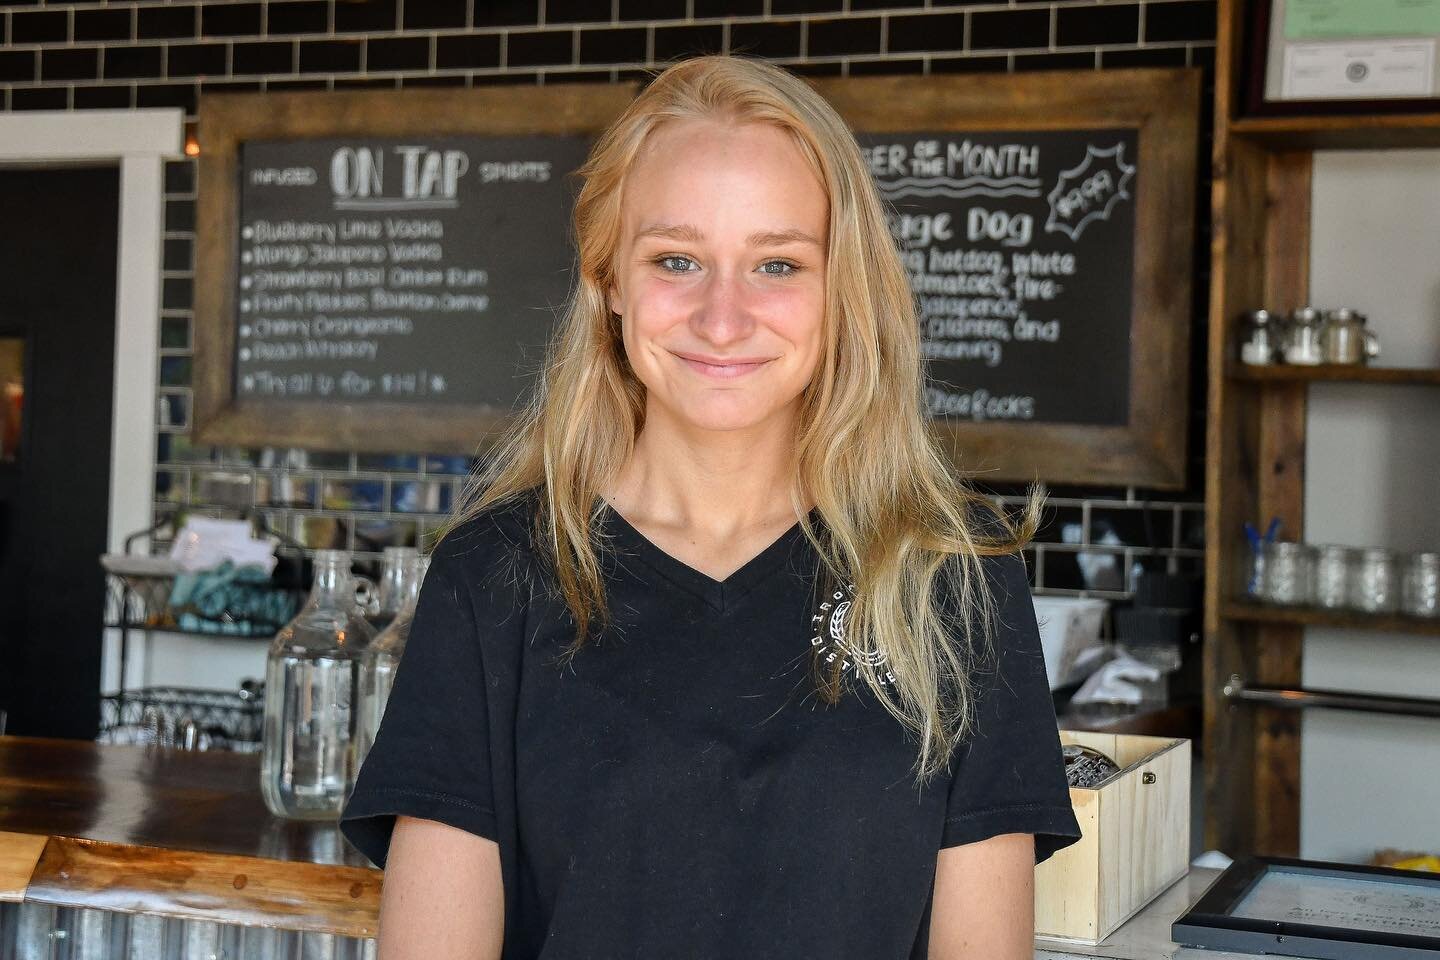 ⭐️ STAFF SPOTLIGHT ⭐️ Chances are that if you&rsquo;ve been to the Shoe, you&rsquo;ve been greeted by Lilly&rsquo;s smiling face! Lilly was our hostess and now one of our great servers. Lilly is a Niles native and graduated from Niles New Tech Academ